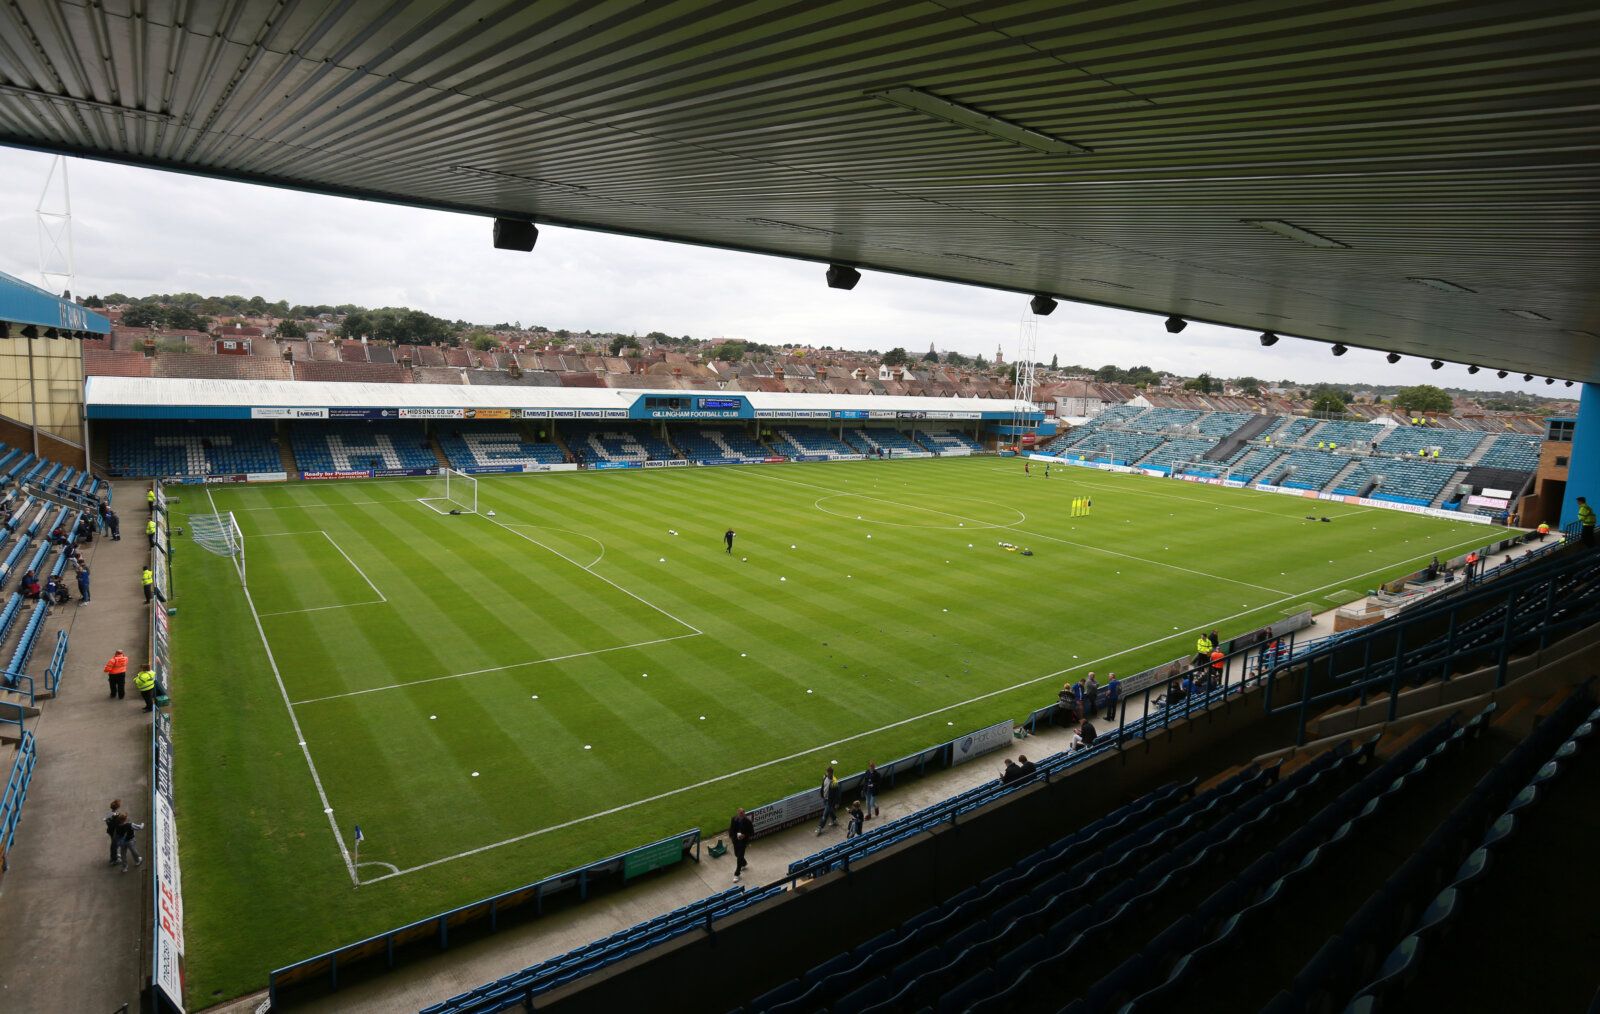 Football - Gillingham v Doncaster Rovers - Sky Bet Football League One - MEMS Priestfield Stadium - 15/16 - 5/9/15 
General view before the game 
Mandatory Credit: Action Images / John Marsh 
EDITORIAL USE ONLY. No use with unauthorized audio, video, data, fixture lists, club/league logos or 